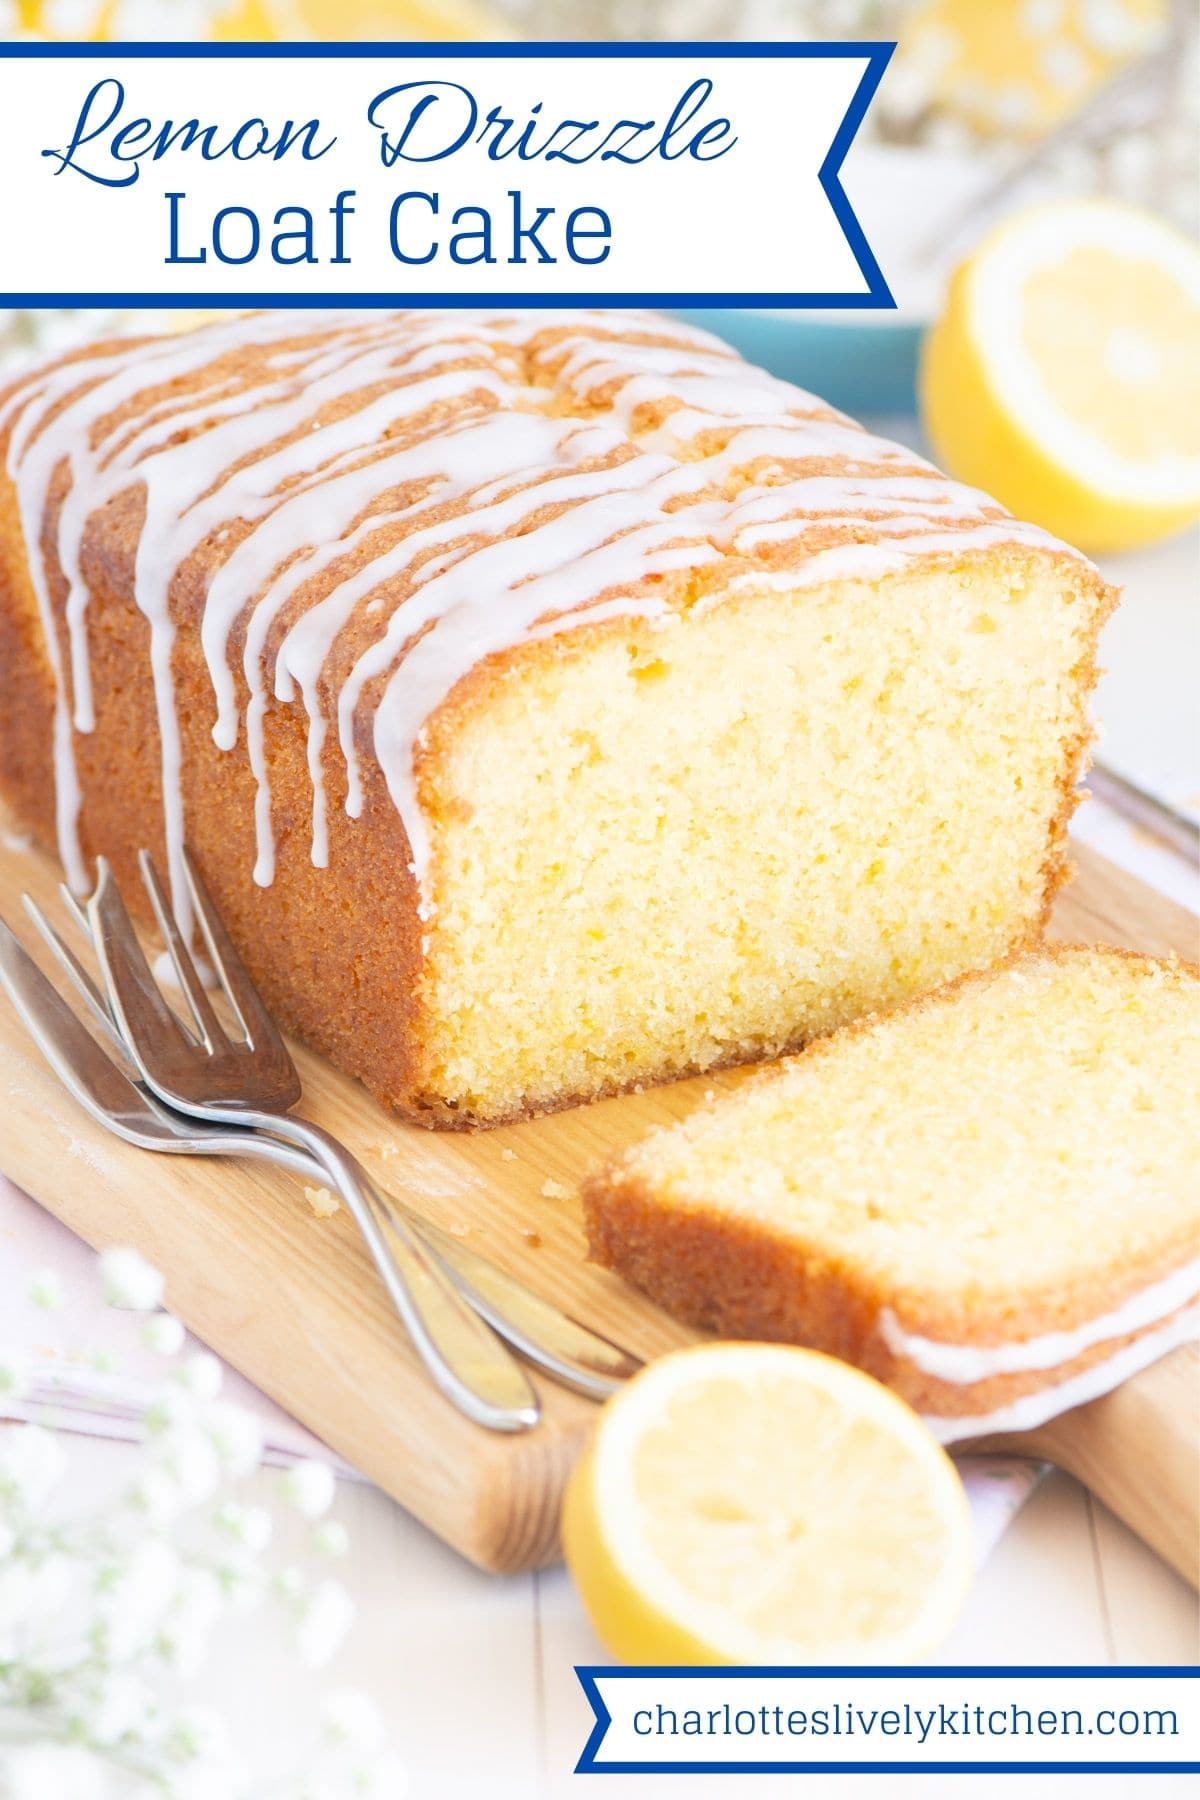 Pinterest suitable graphic - Sliced lemon drizzle cake showing a slice and the inner crumb with the recipe title shown on a banner at the top. 